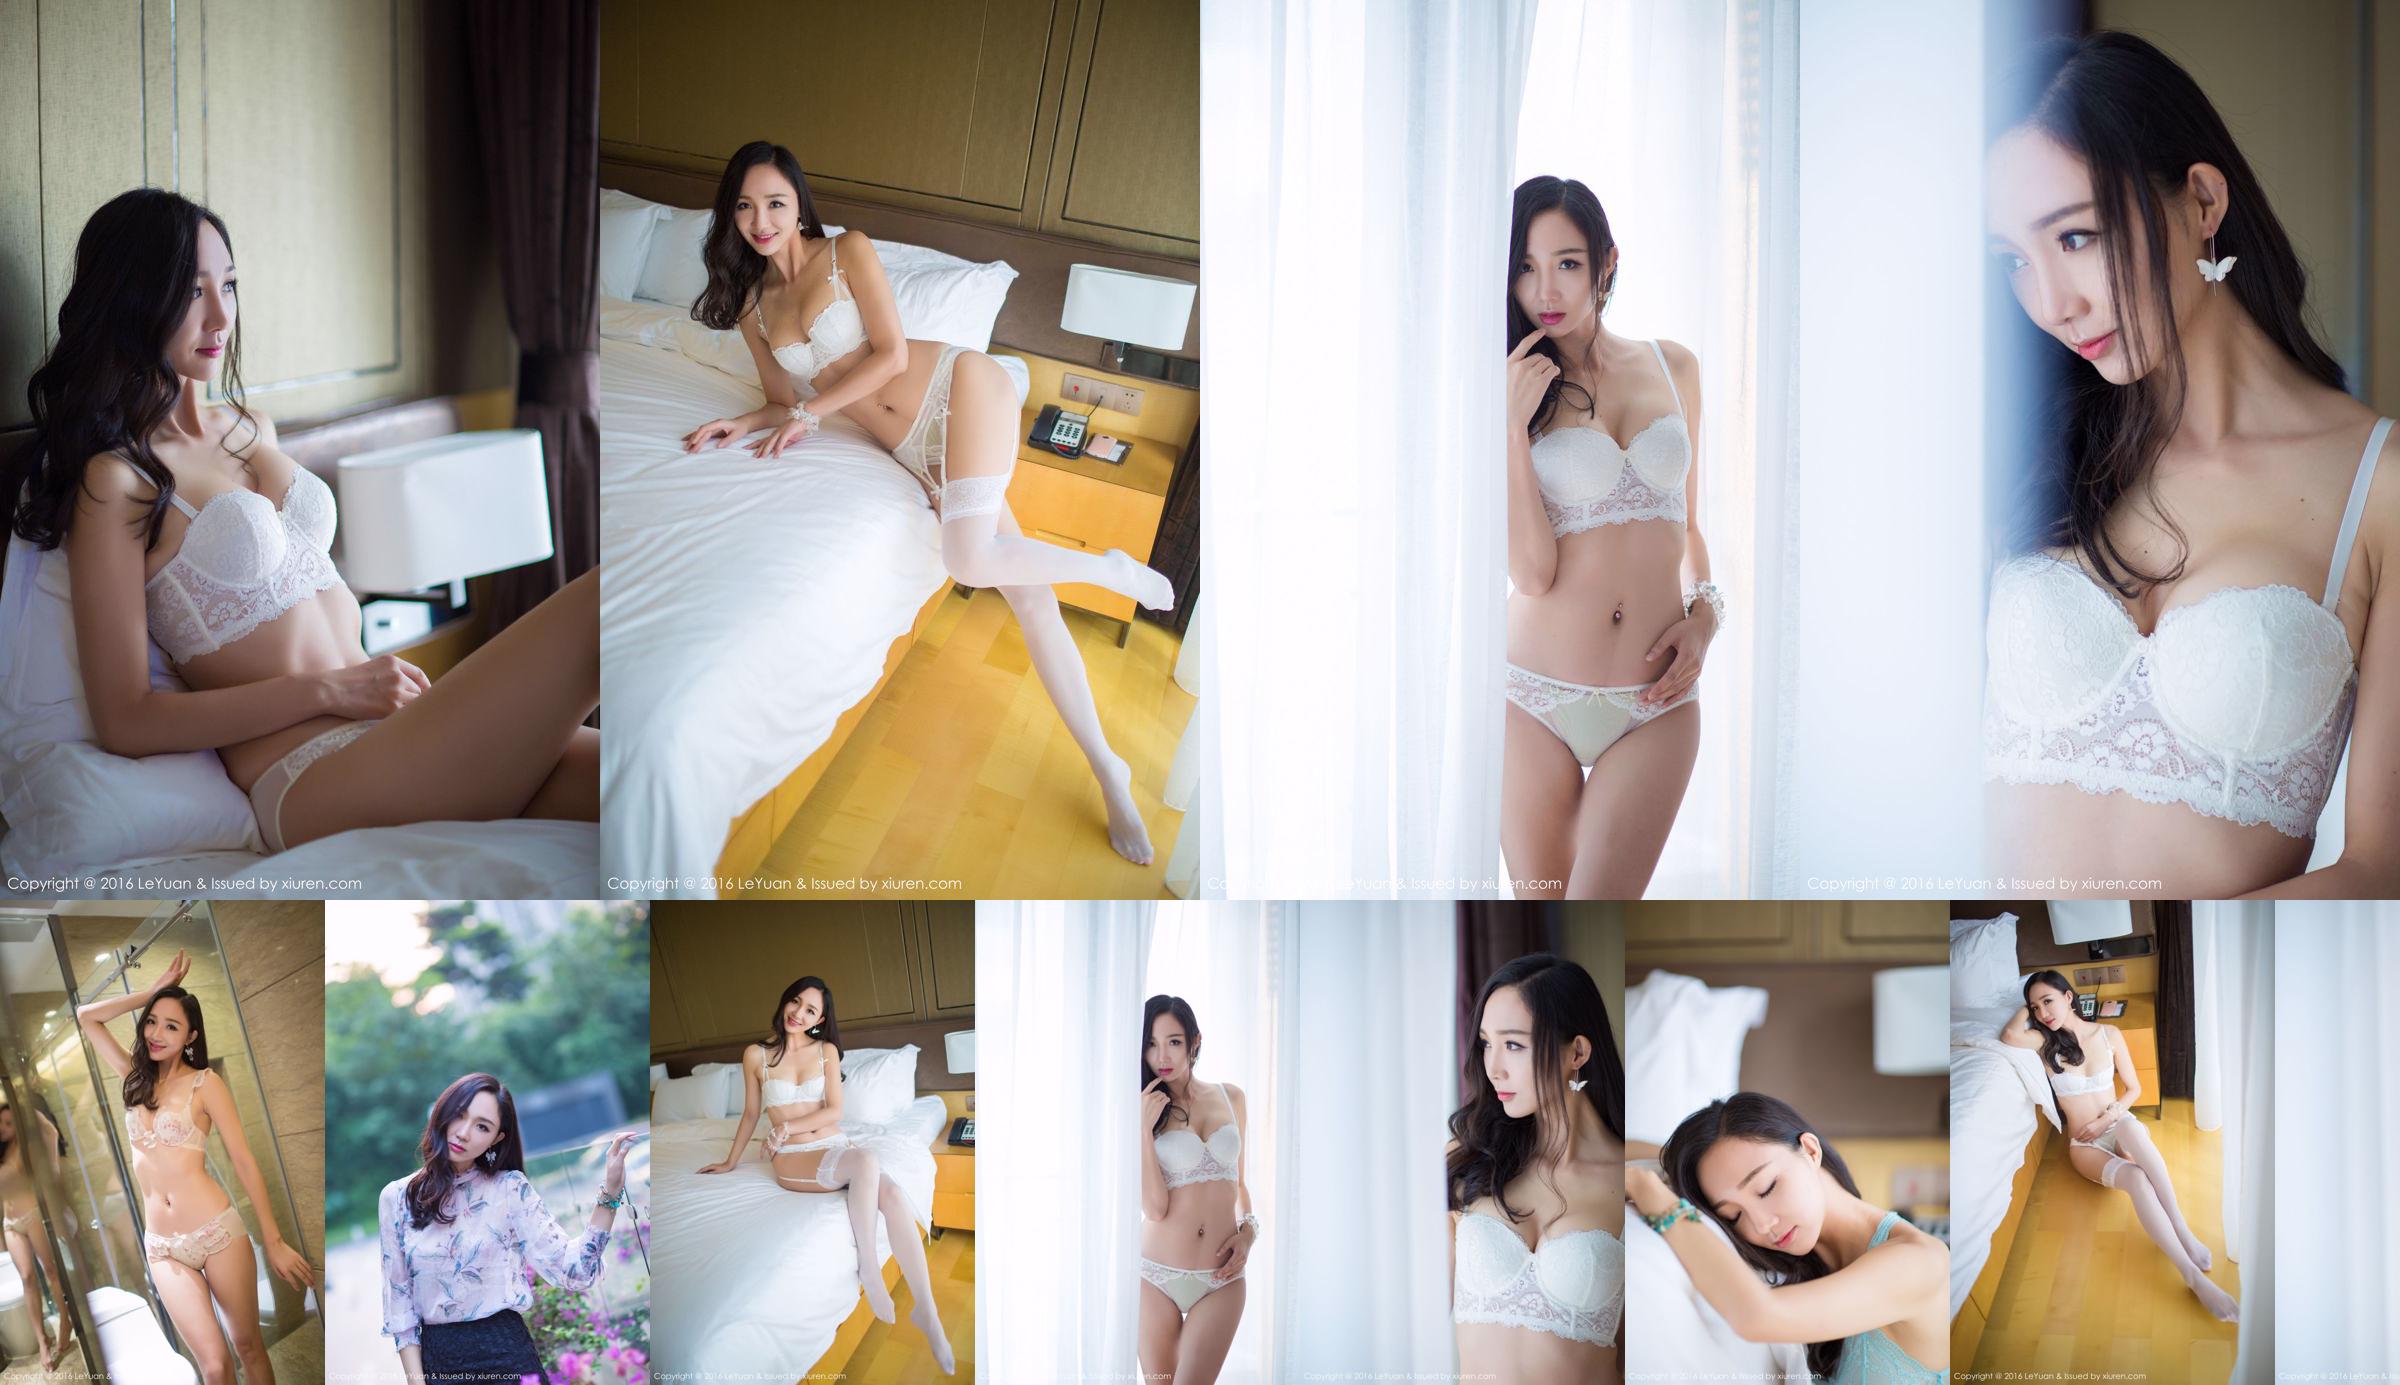 Beibei maggie "Longues belles jambes, grande figure gracieuse" [Star Paradise LeYuan] Vol.009 No.fdd9e9 Page 8